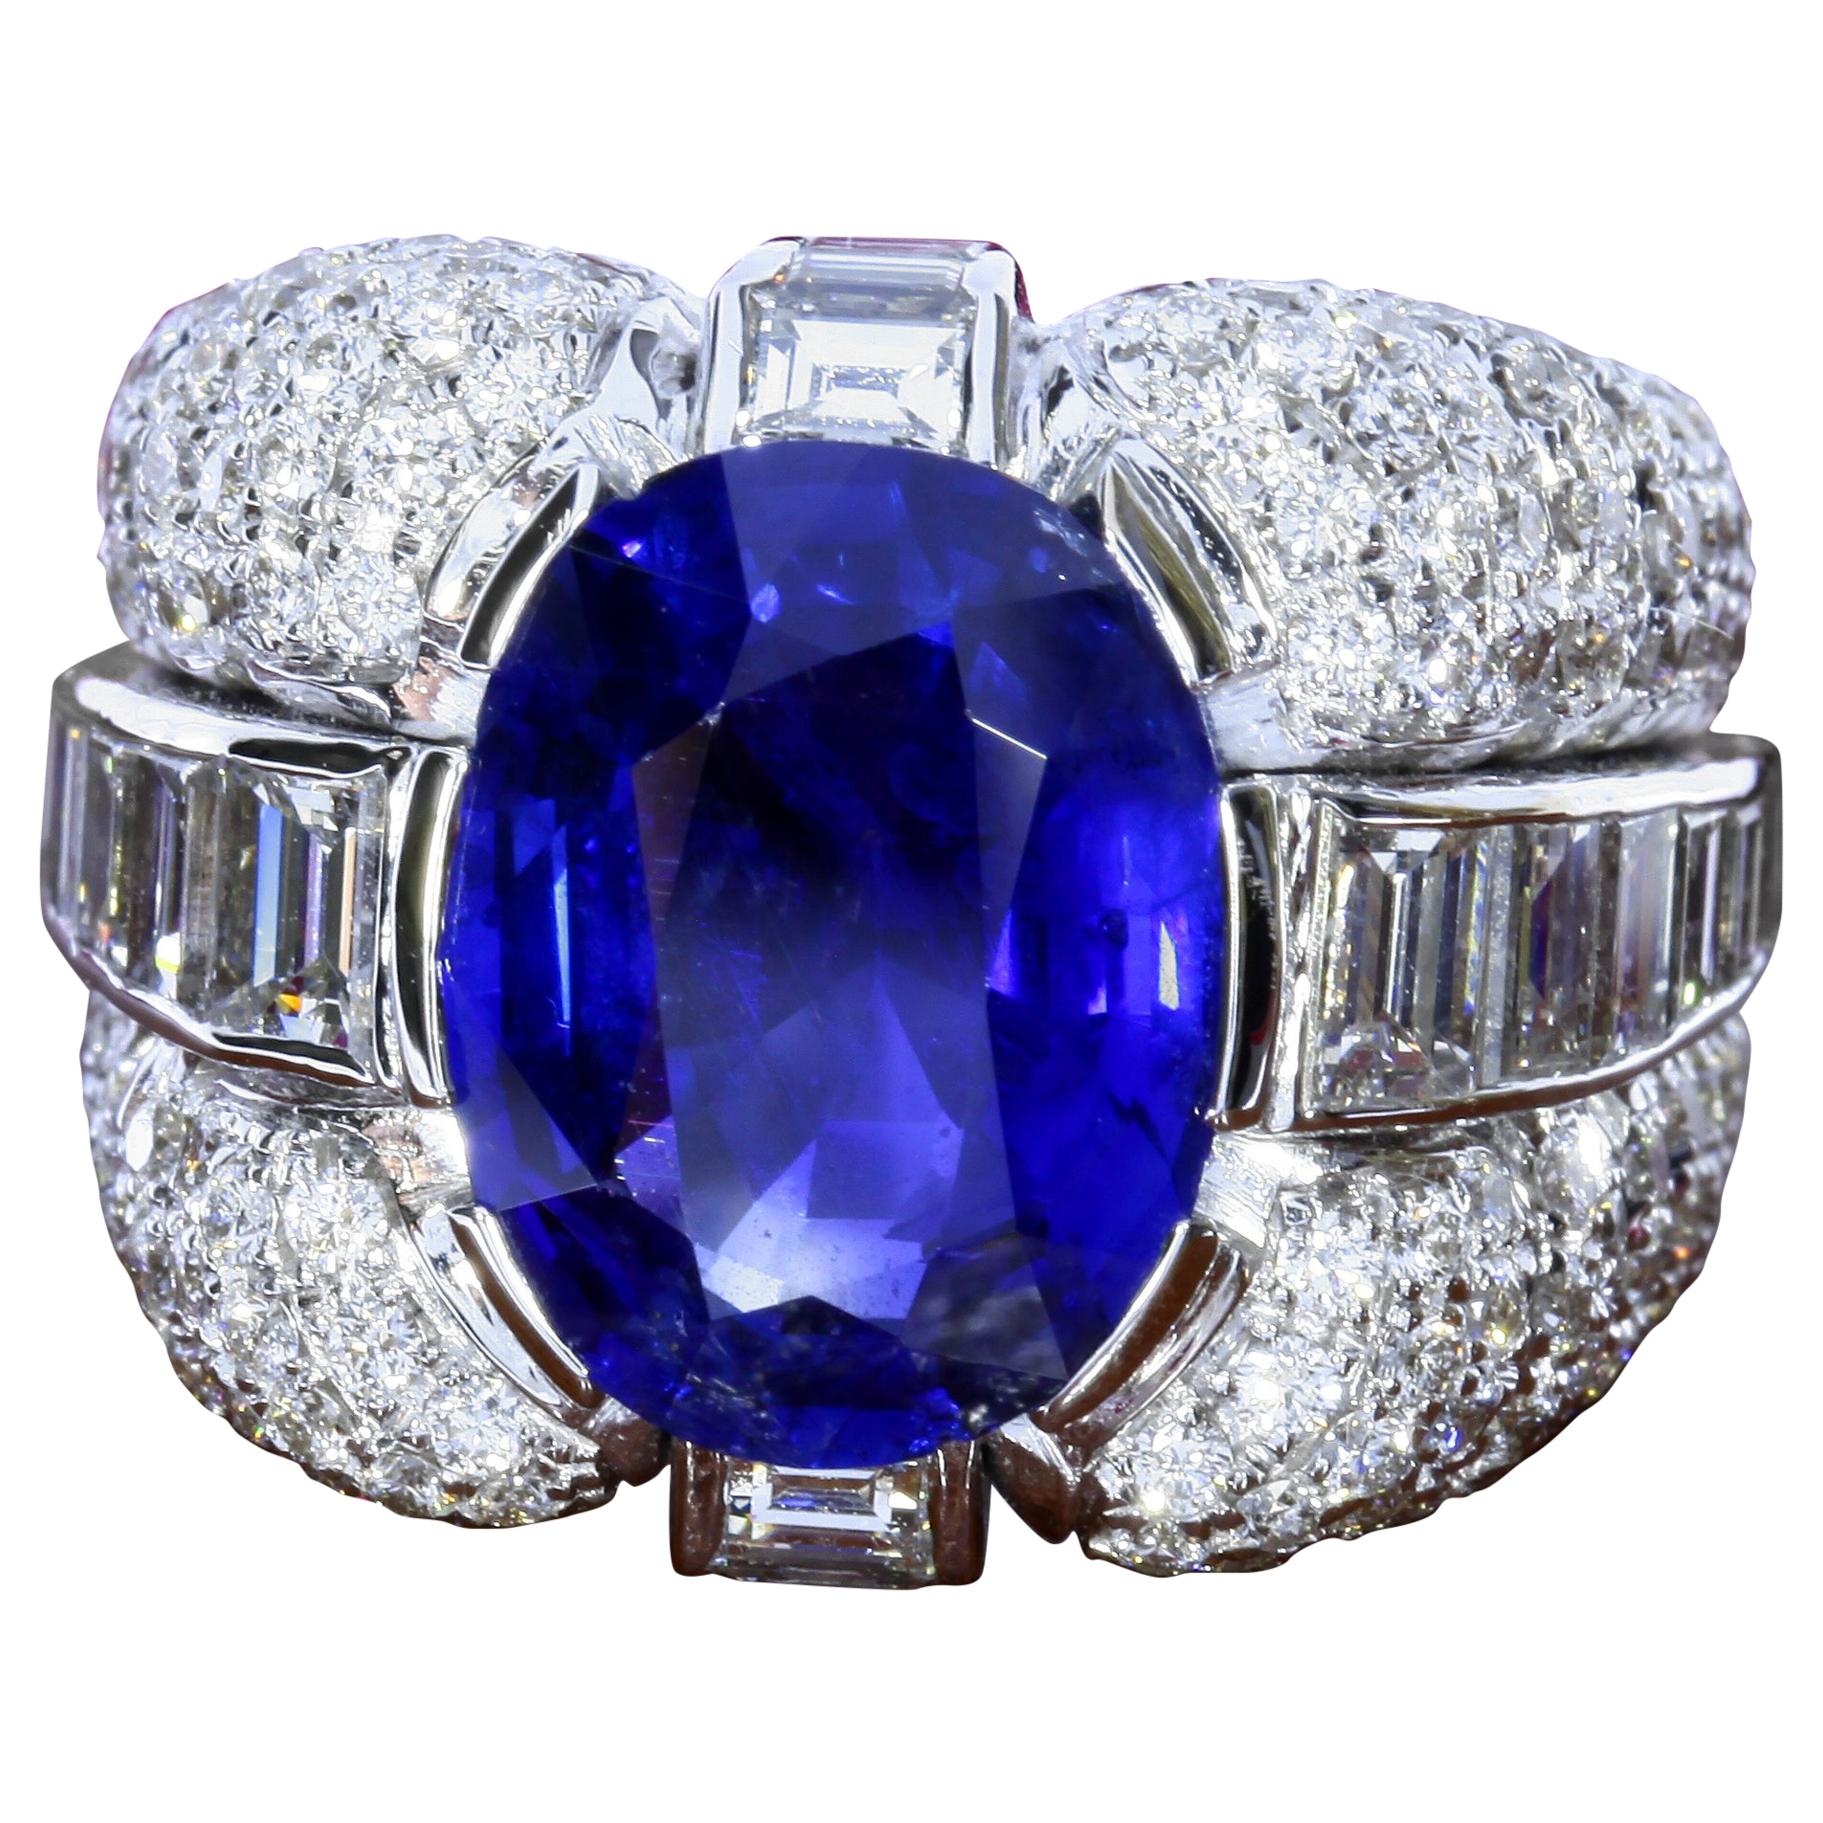 SSEF Certified 6.09 Carat Burmese Untreated Sapphire in a Diamond Ring For Sale